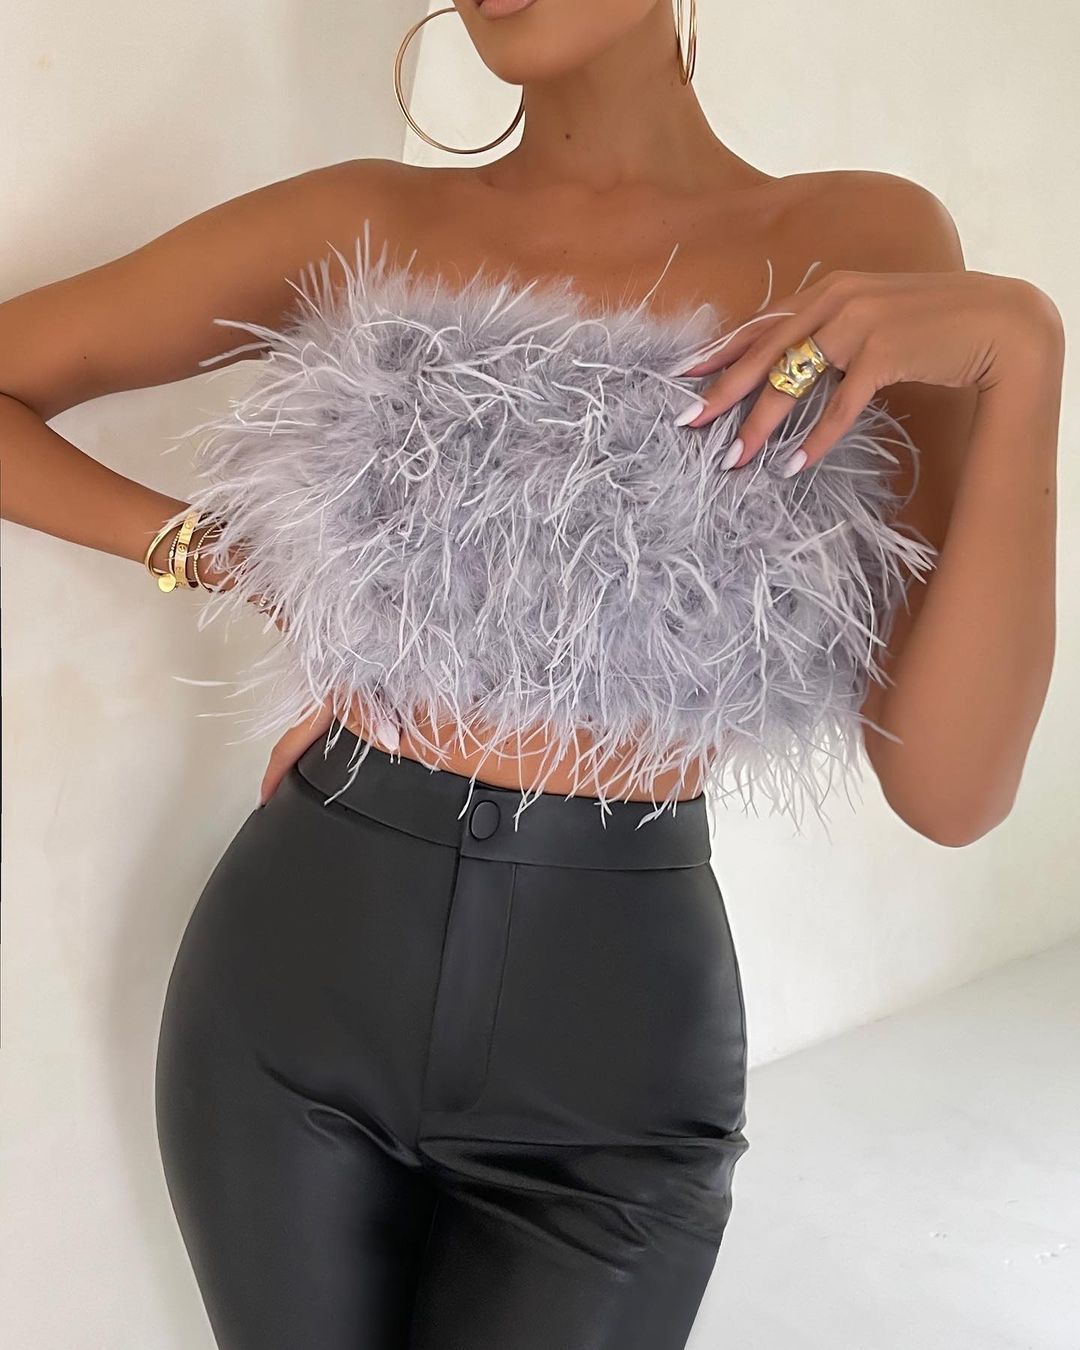 Furry Strapless Top: A stylish and textured top featuring a soft and furry fabric and a strapless neckline for a chic and trendy look.